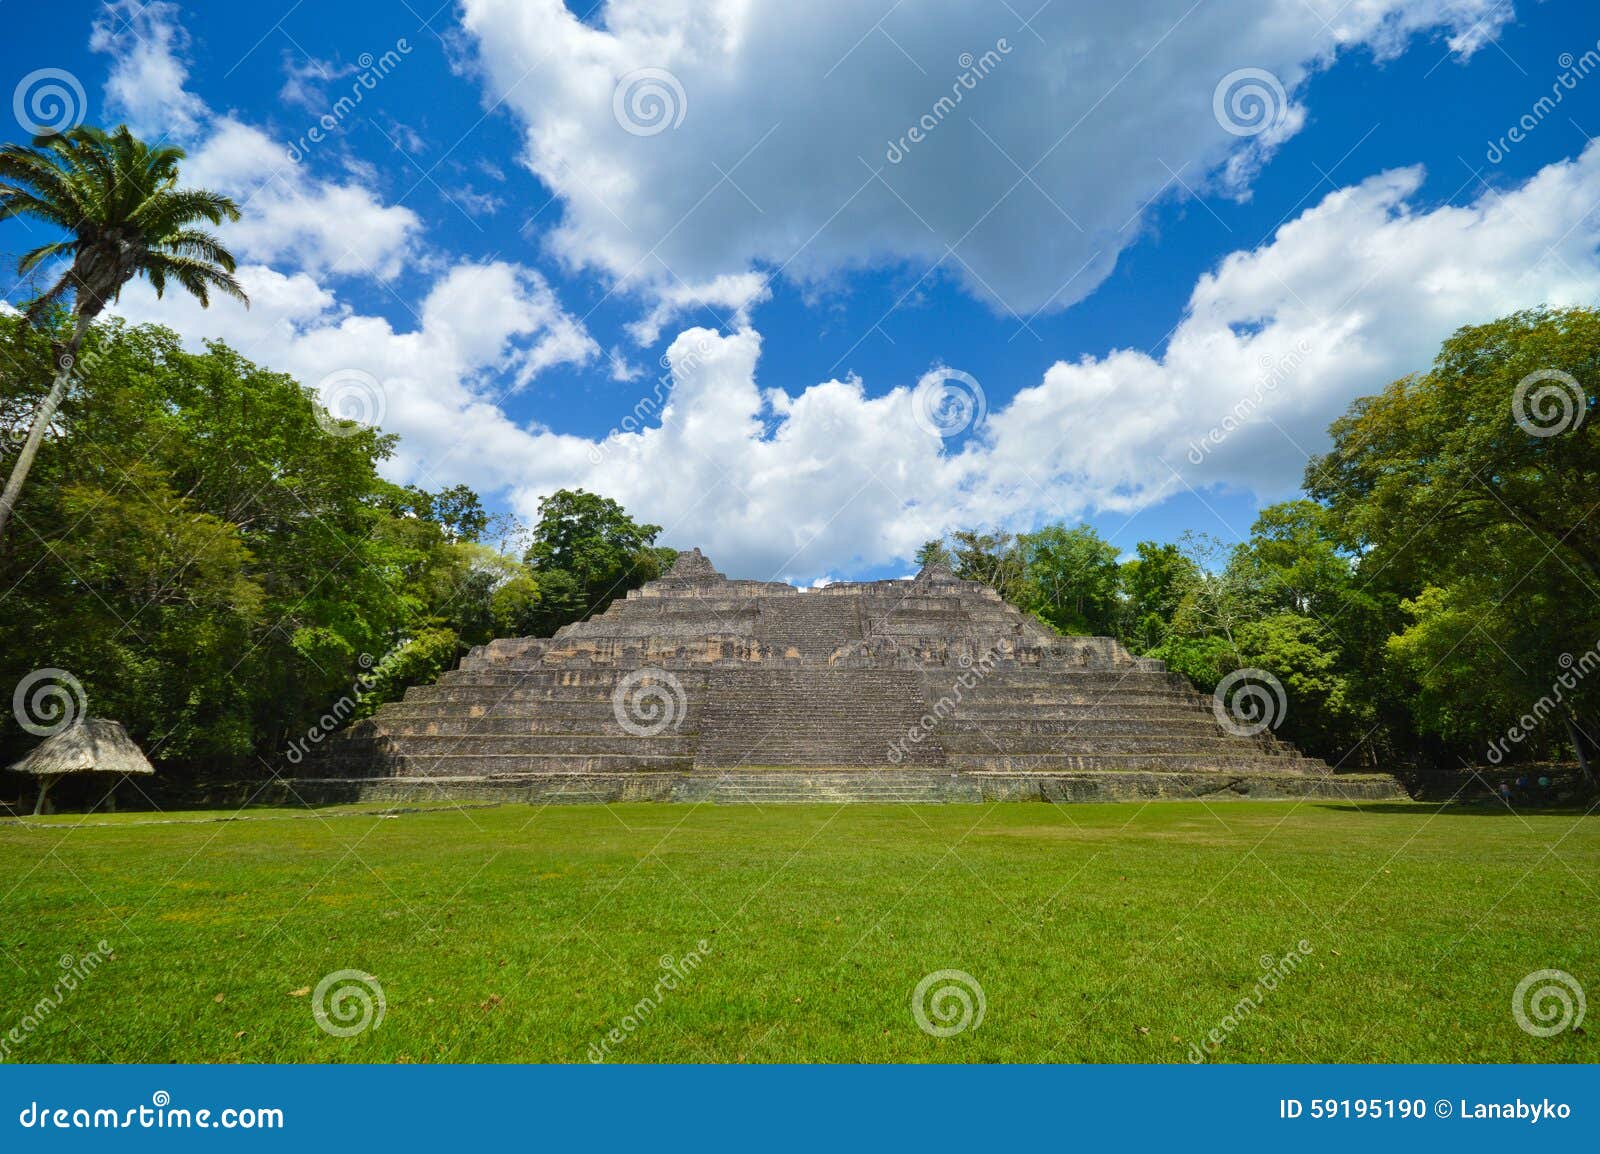 caana pyramid at caracol archeological site of mayan civilization in western belize